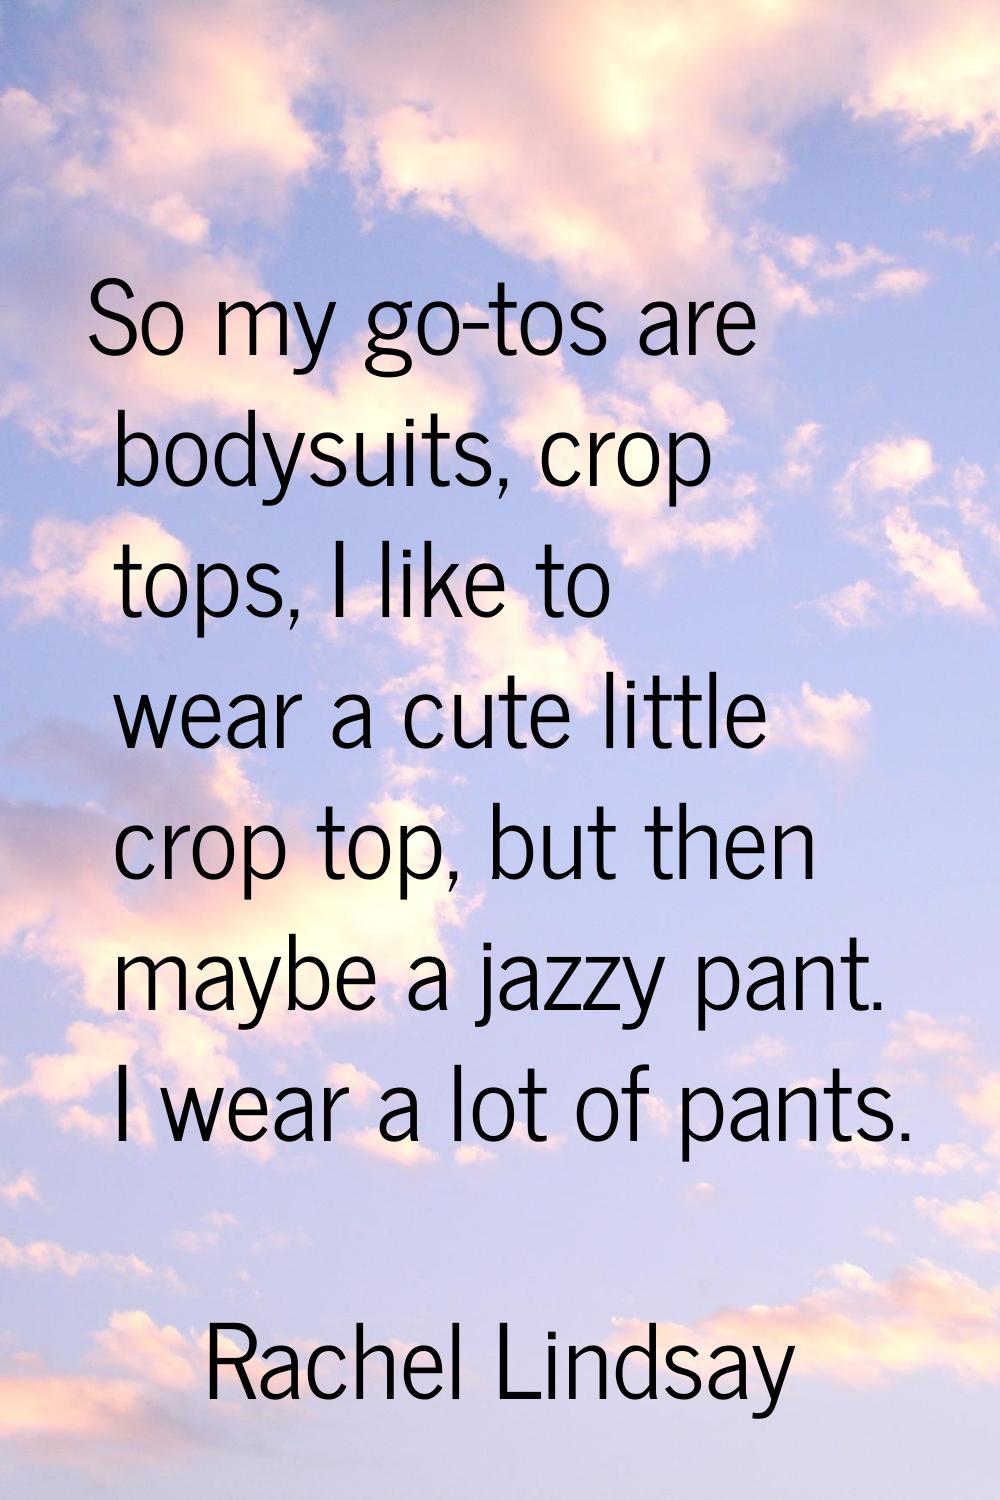 So my go-tos are bodysuits, crop tops, I like to wear a cute little crop top, but then maybe a jazz